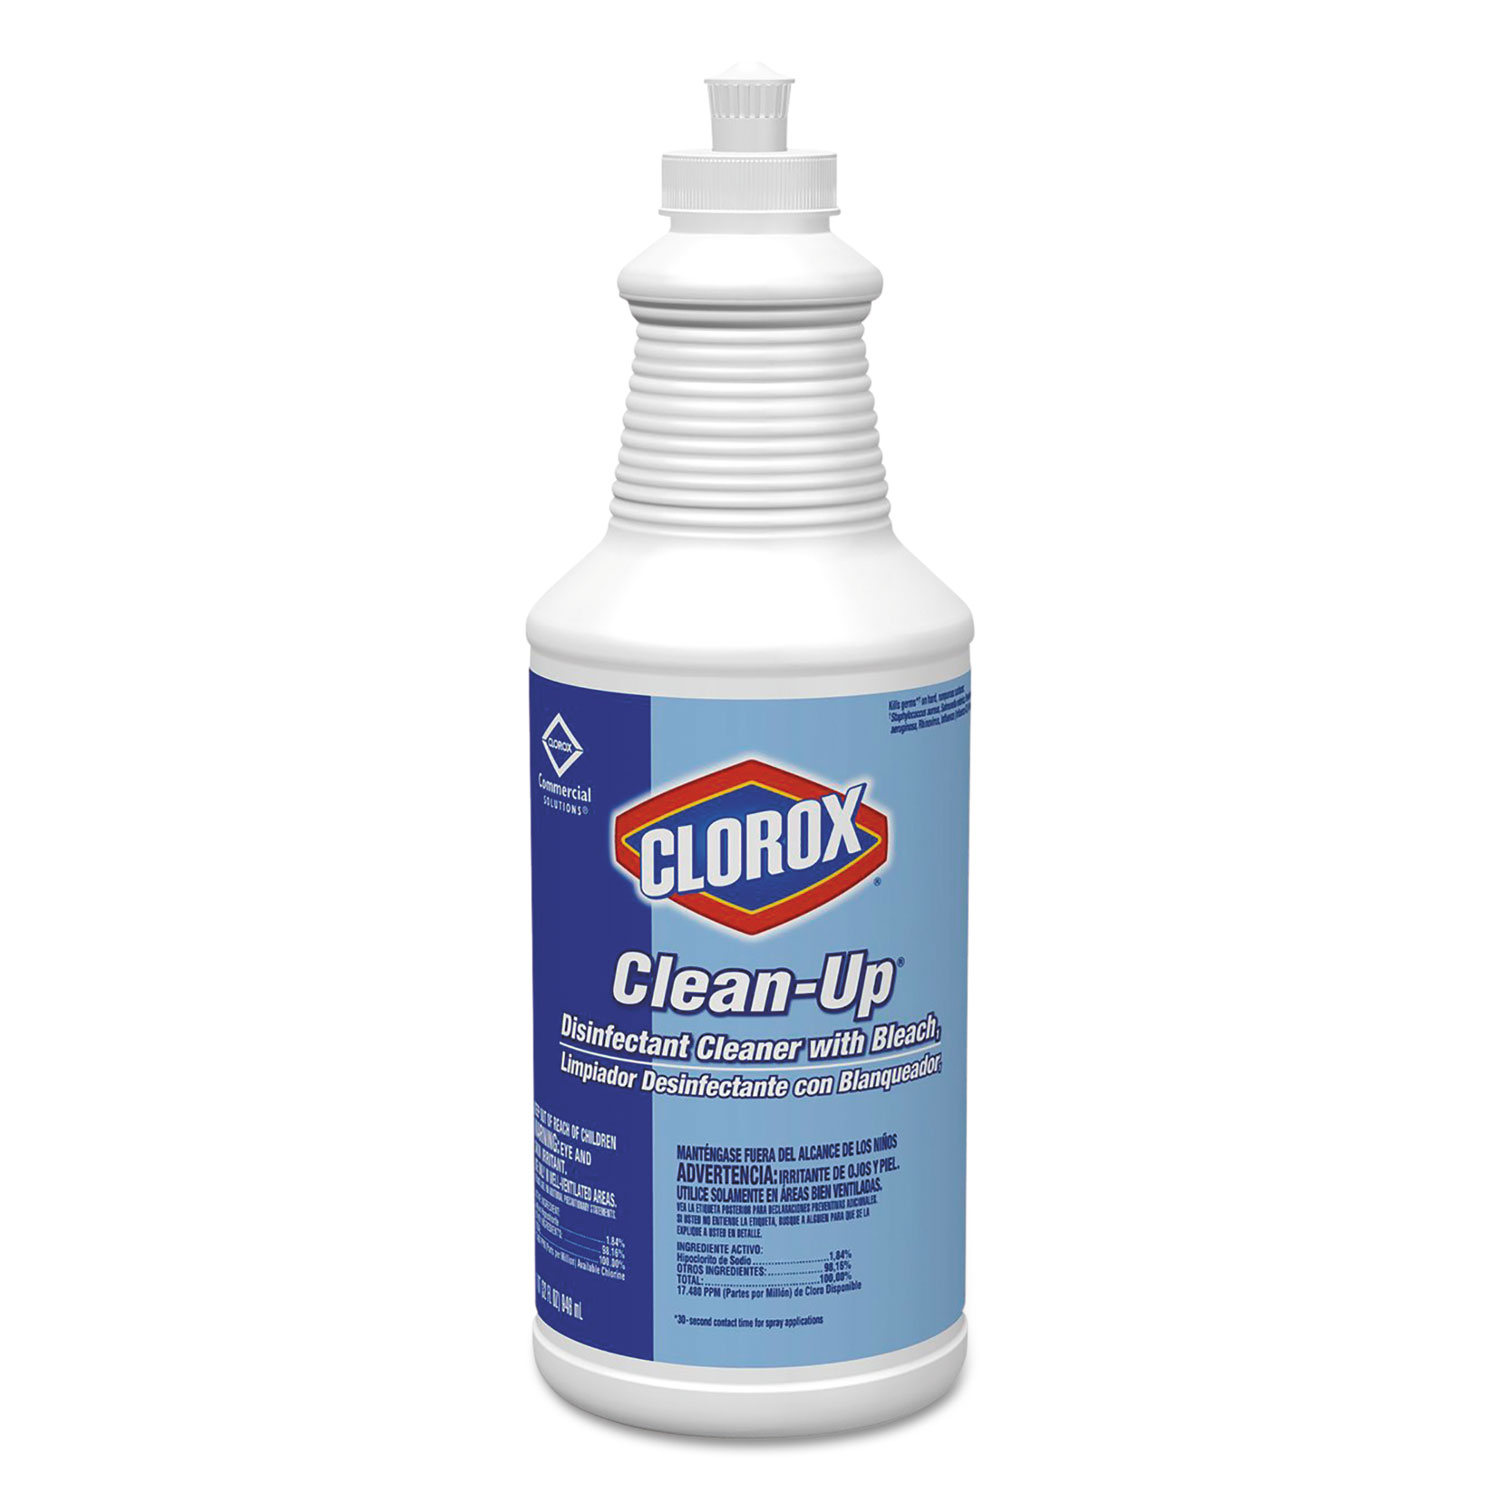  Clorox 31523 Clean-Up Disinfectant Cleaner with Bleach, Fresh Scent, 32 oz Bottle, 6/Ctn (CLO31523) 